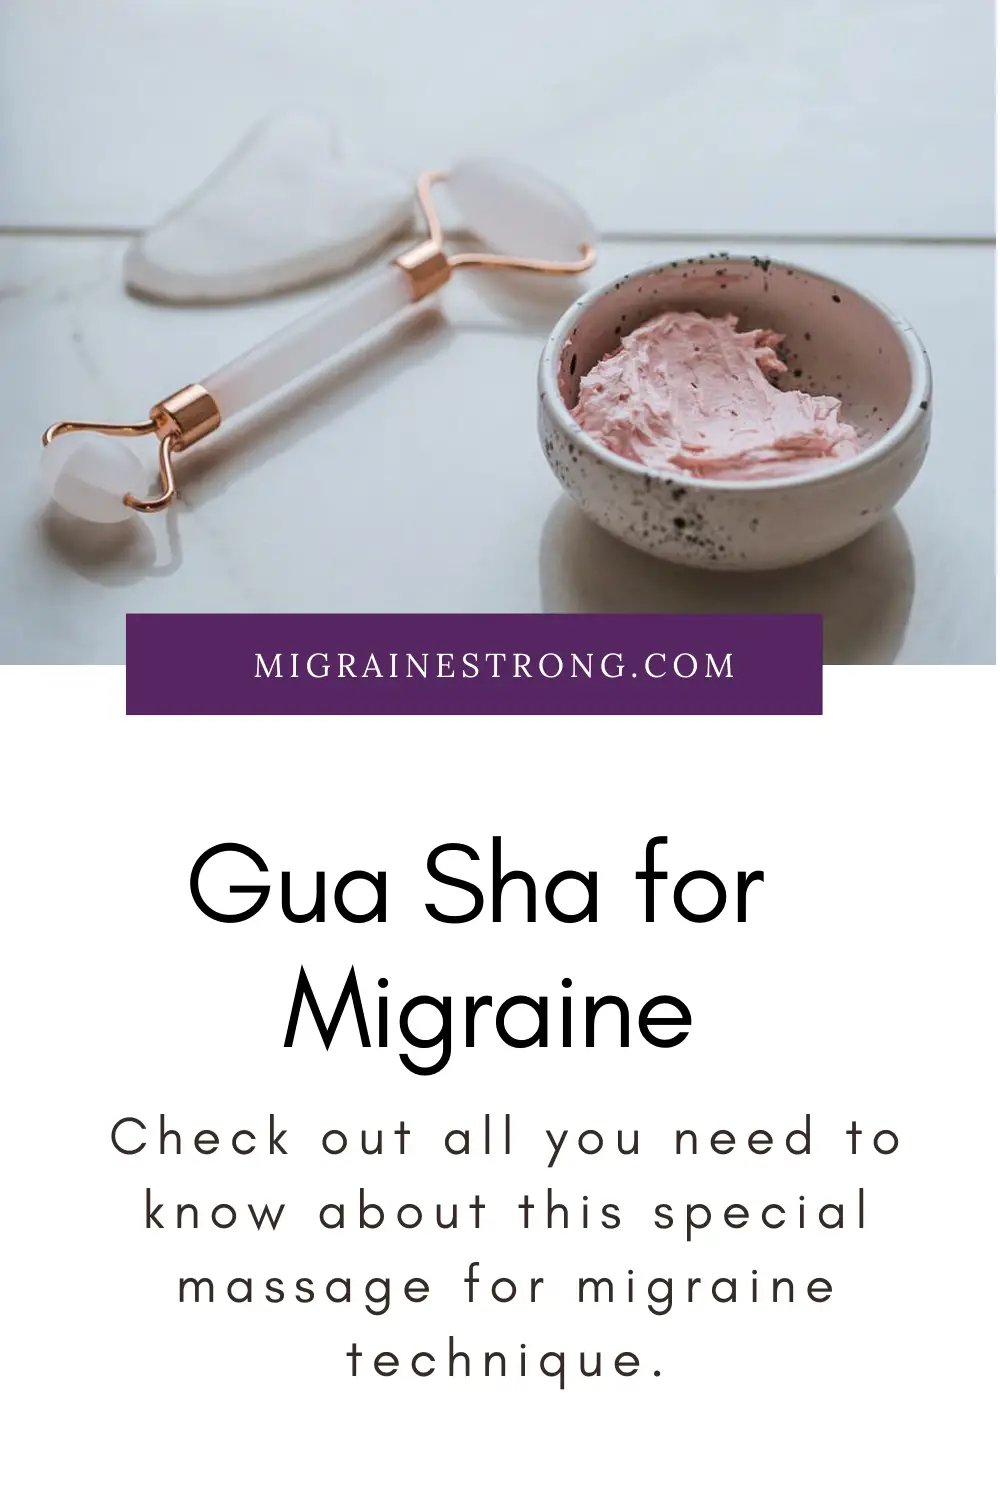 Everything You Need To Know About Gua Sha Massage for Migraine